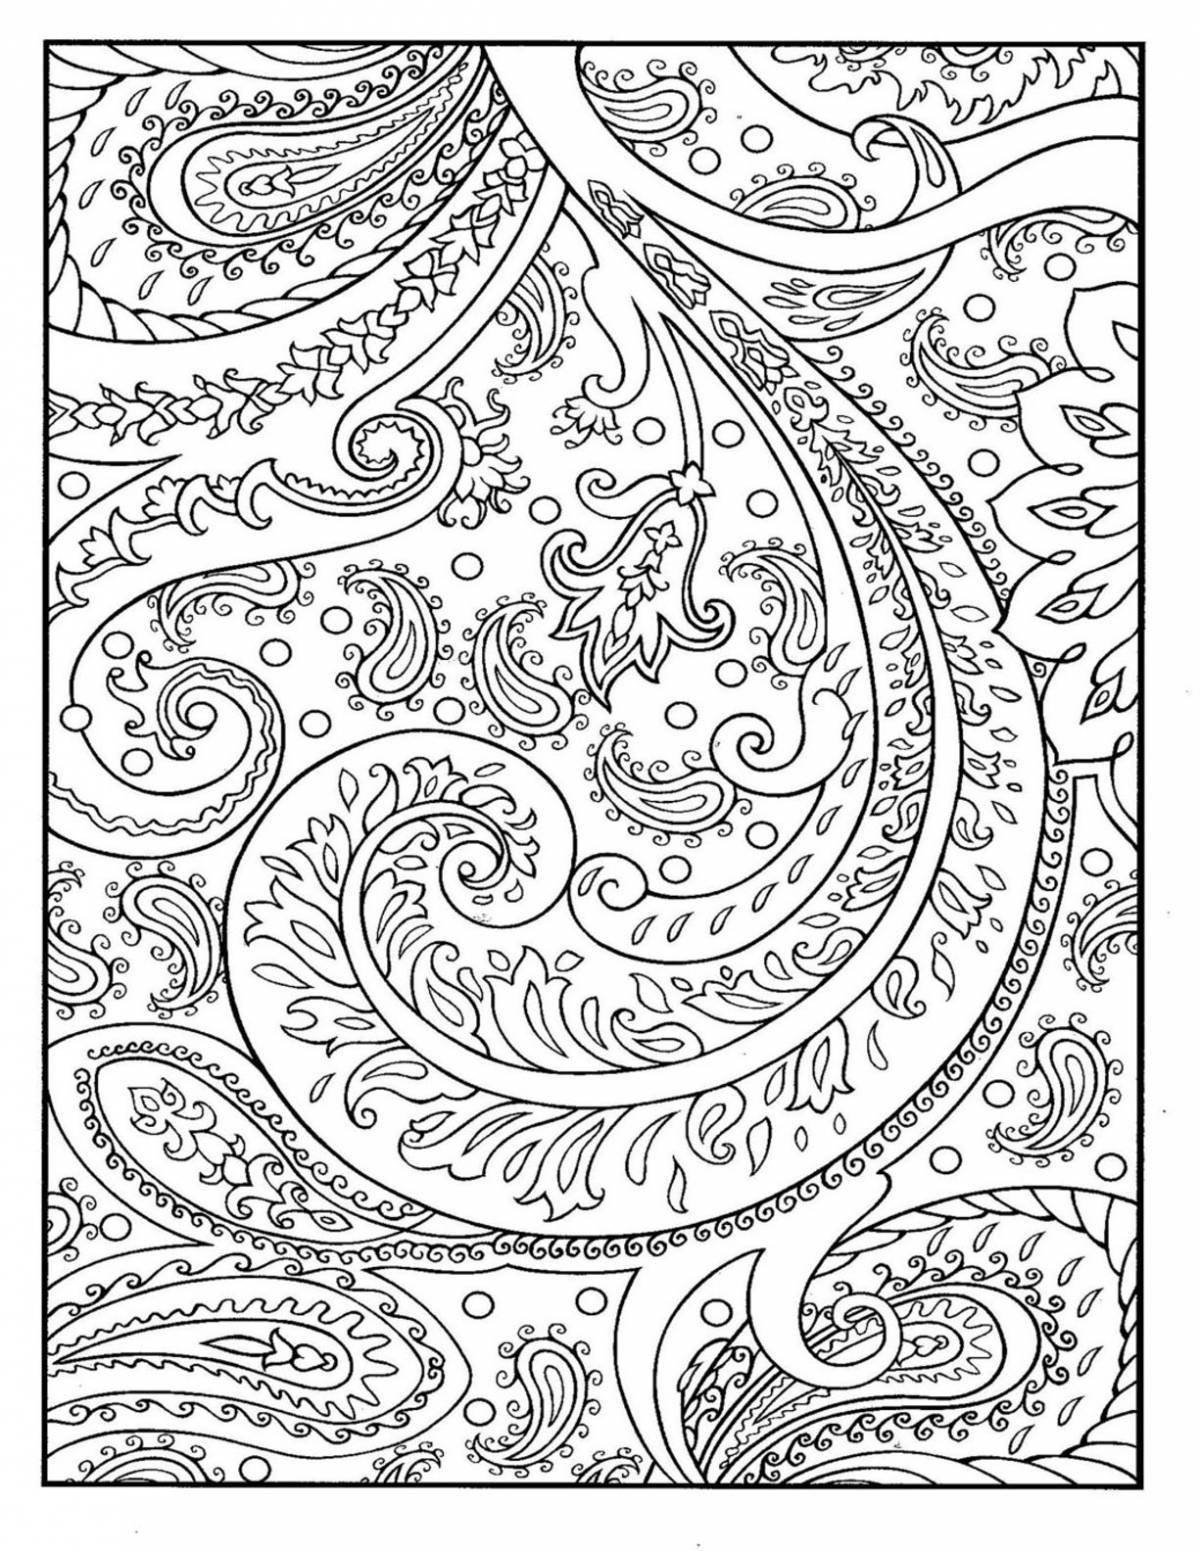 Attractive soothing coloring pages